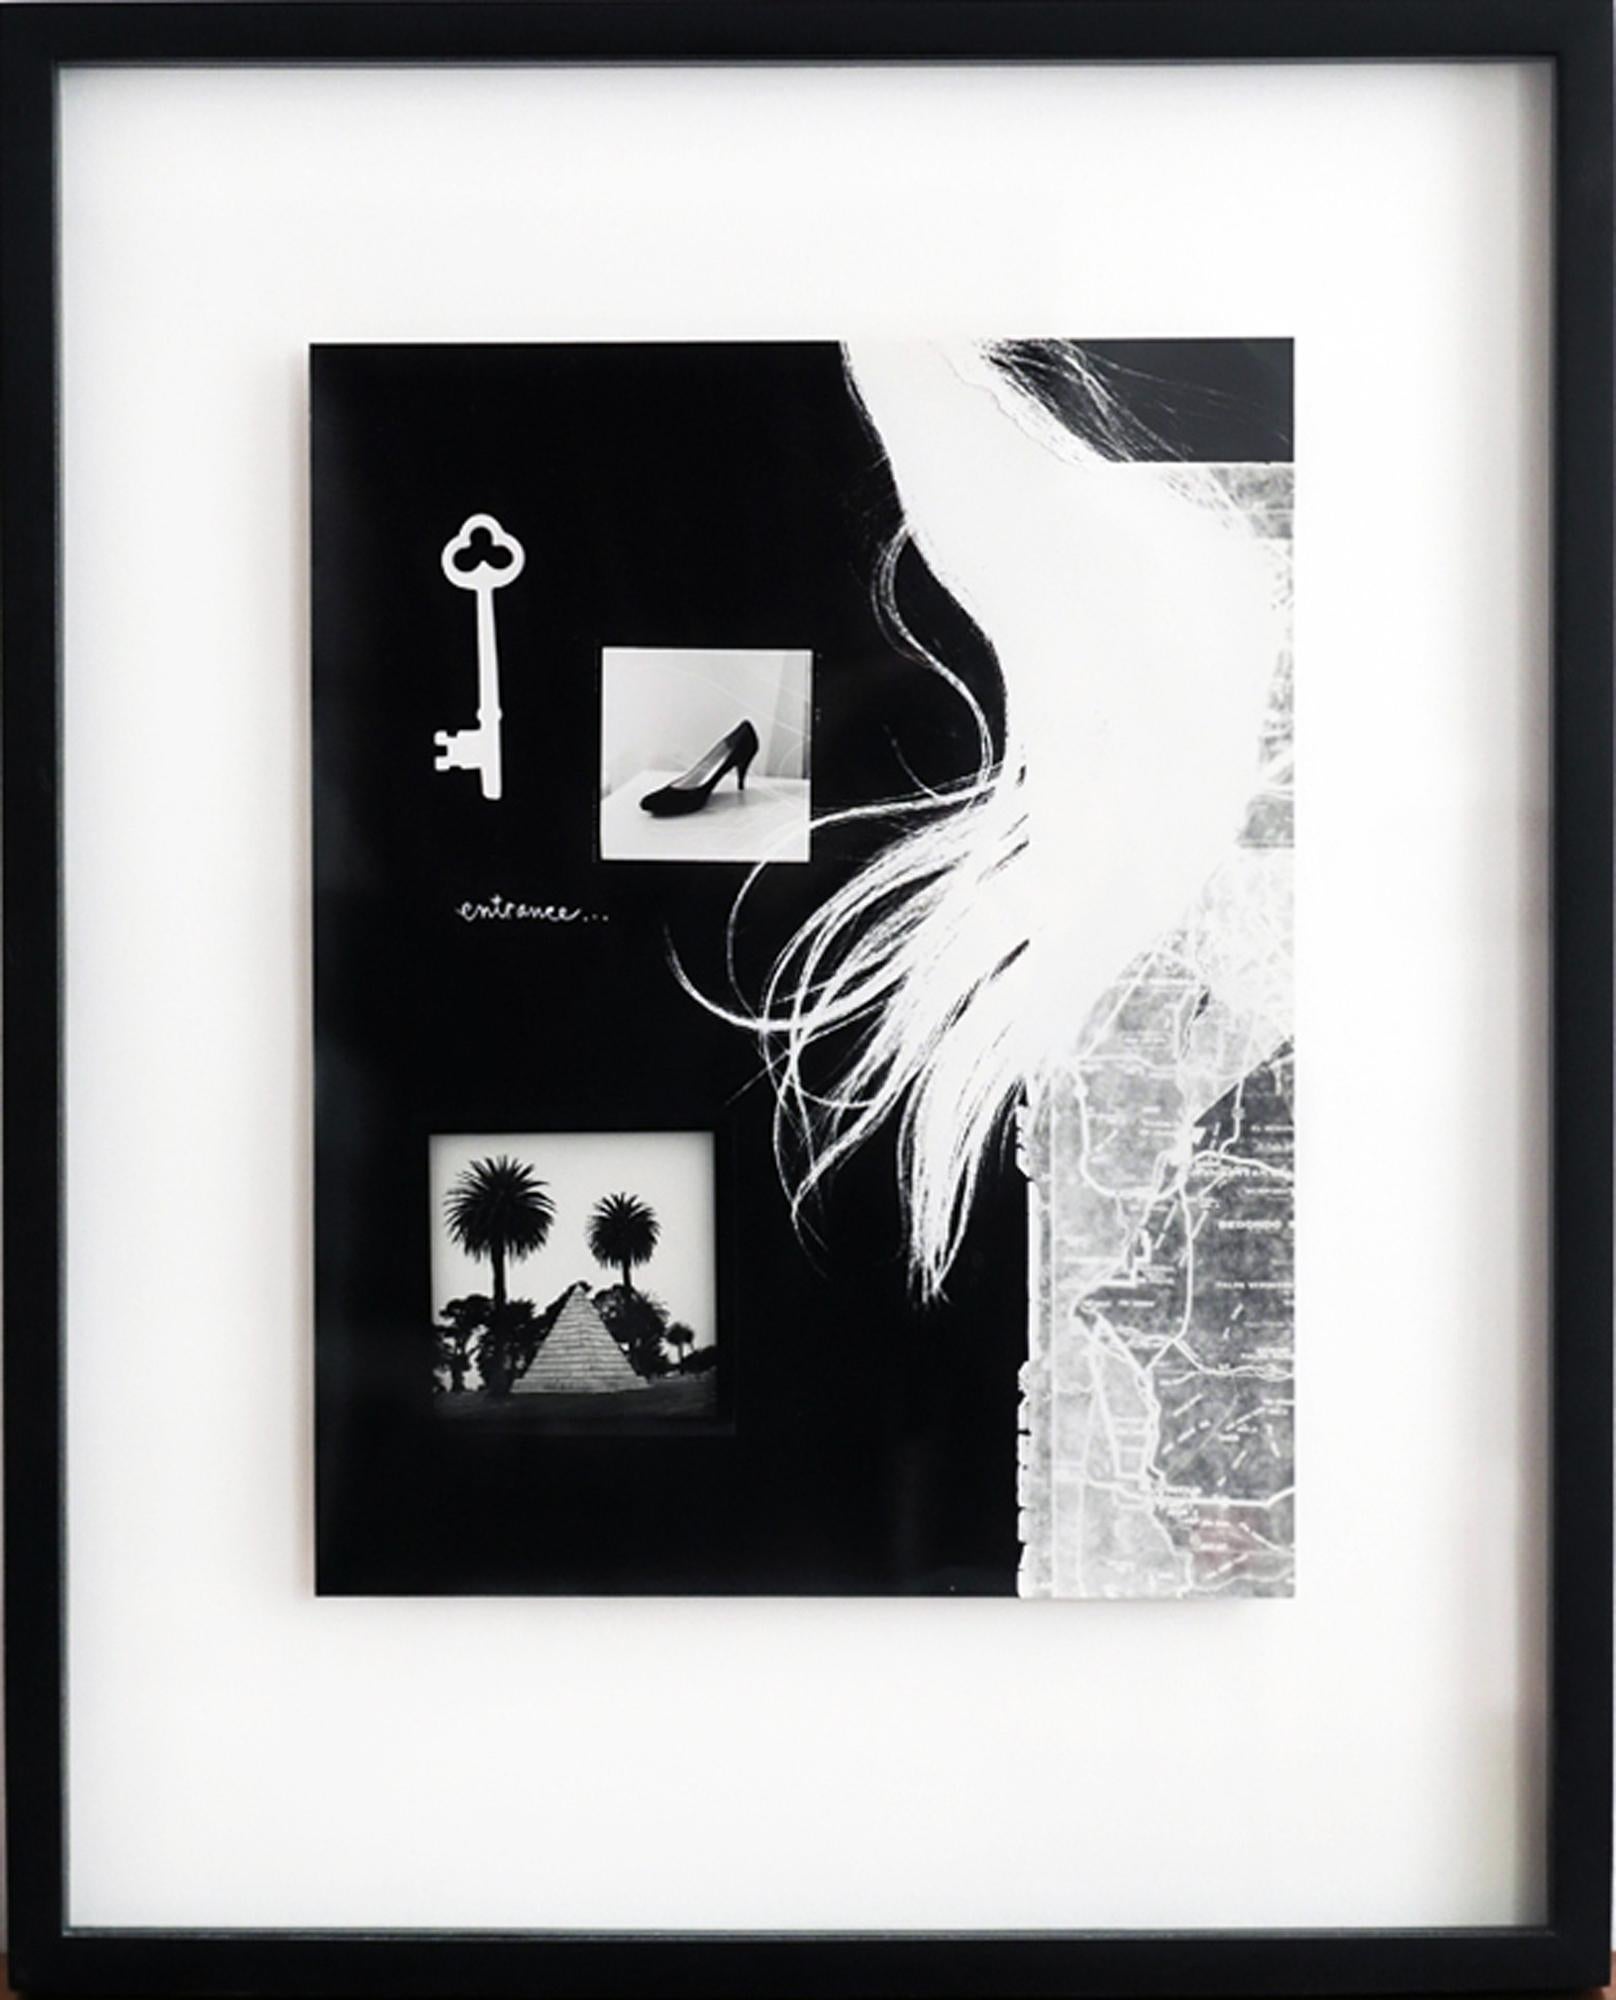 Entrance: framed abstract black & white photograph collage w/ key, shoe, trees - Photograph by Jenny Lynn